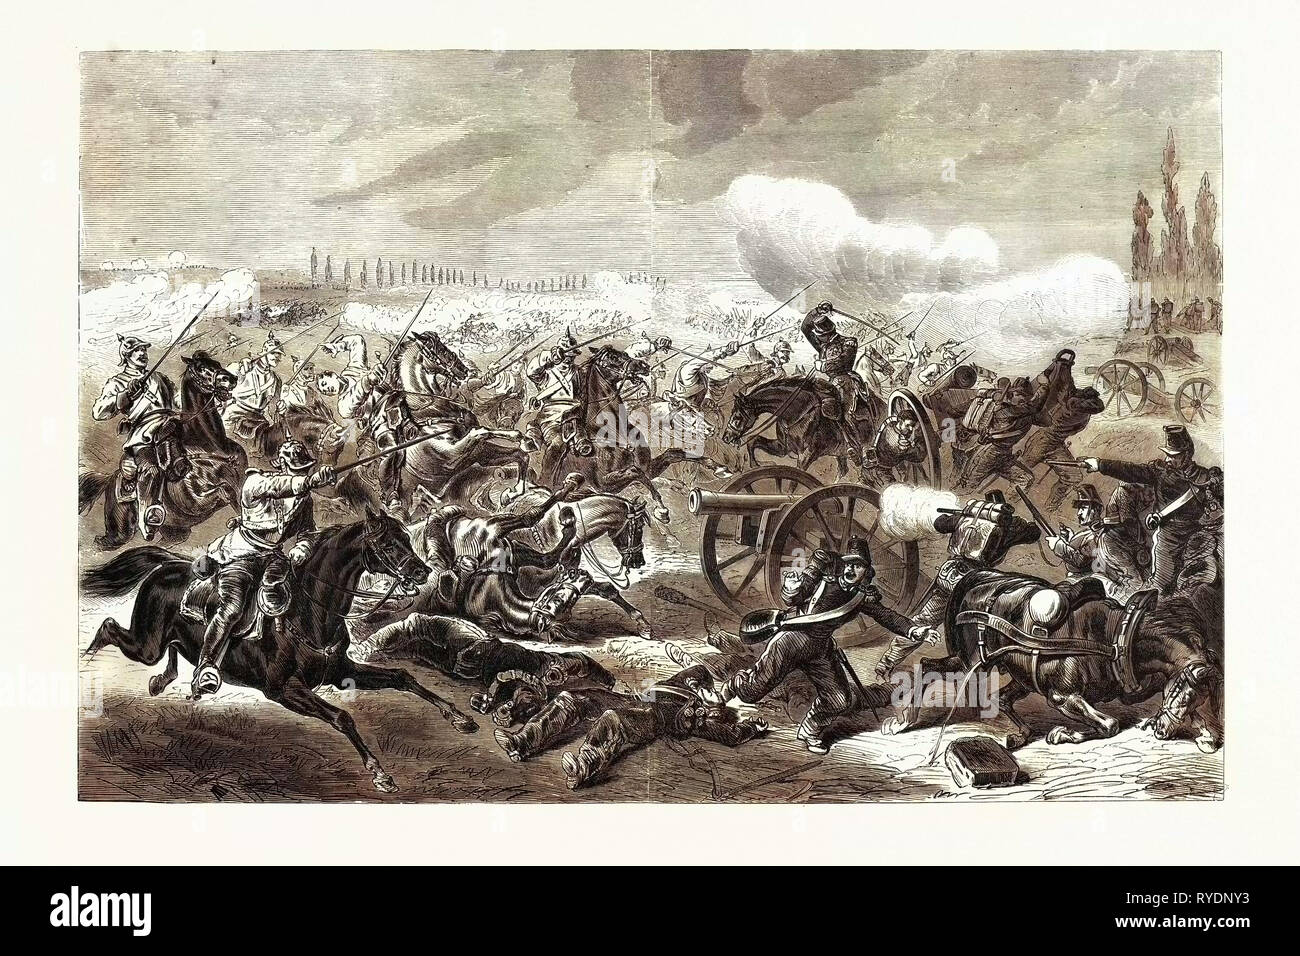 Franco-Prussian War: A French Battery Taken by the 7th Regiment of Prussian Mounted Cavalry Soldiers, the Battle of Mars-La-Tour on 16 August 1870 Stock Photo